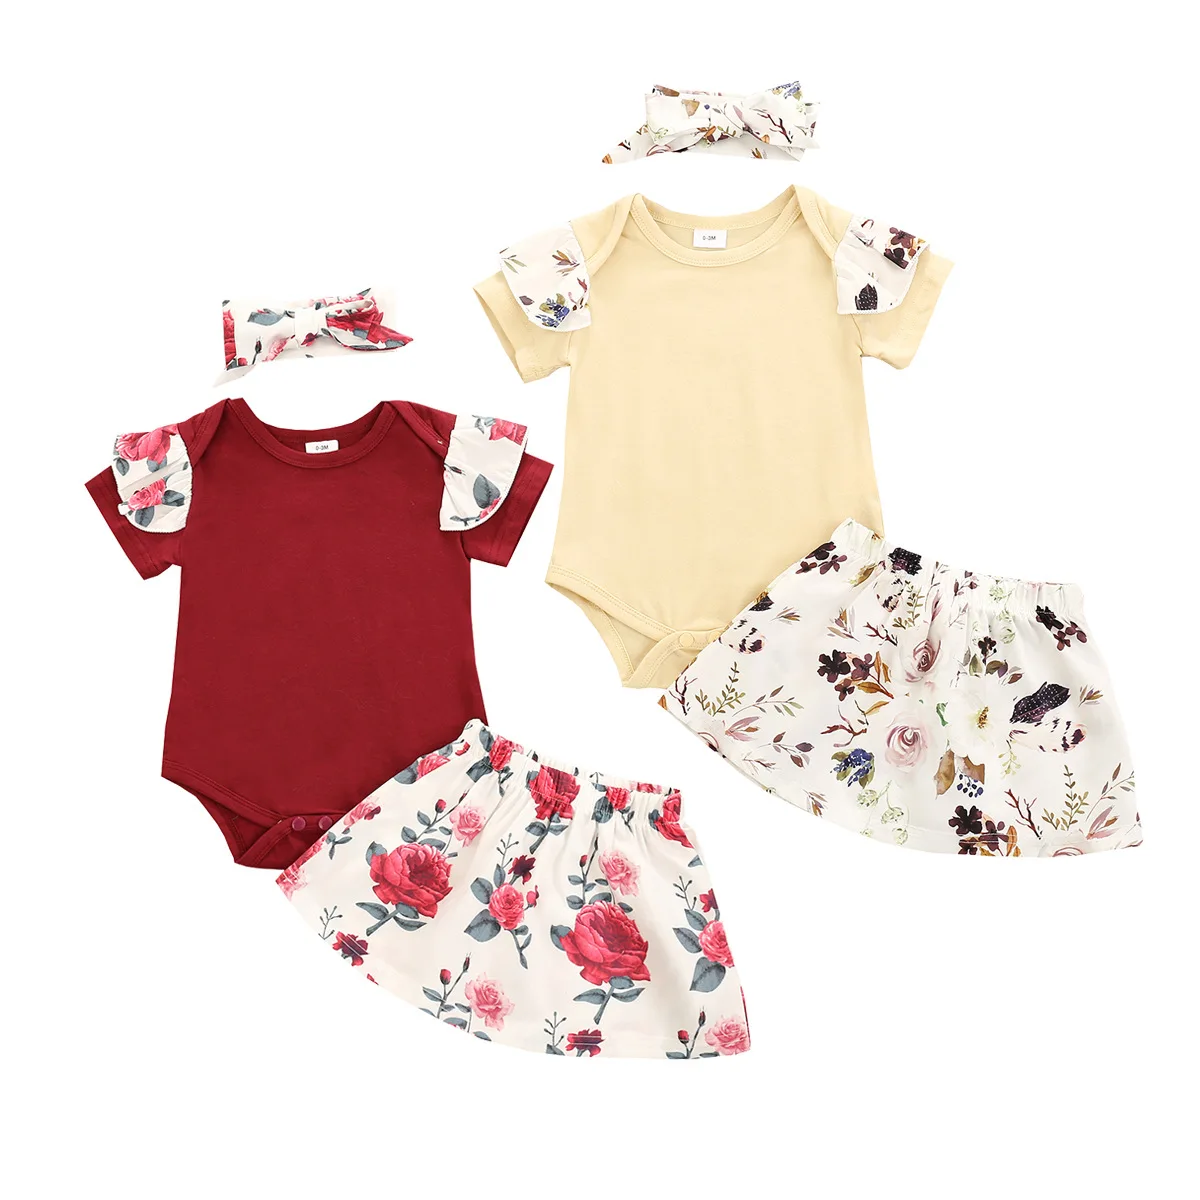 

rose floral skirt ruffled sleeve romper 2 colour choices with headband summer baby girls clothes set, Picture shows